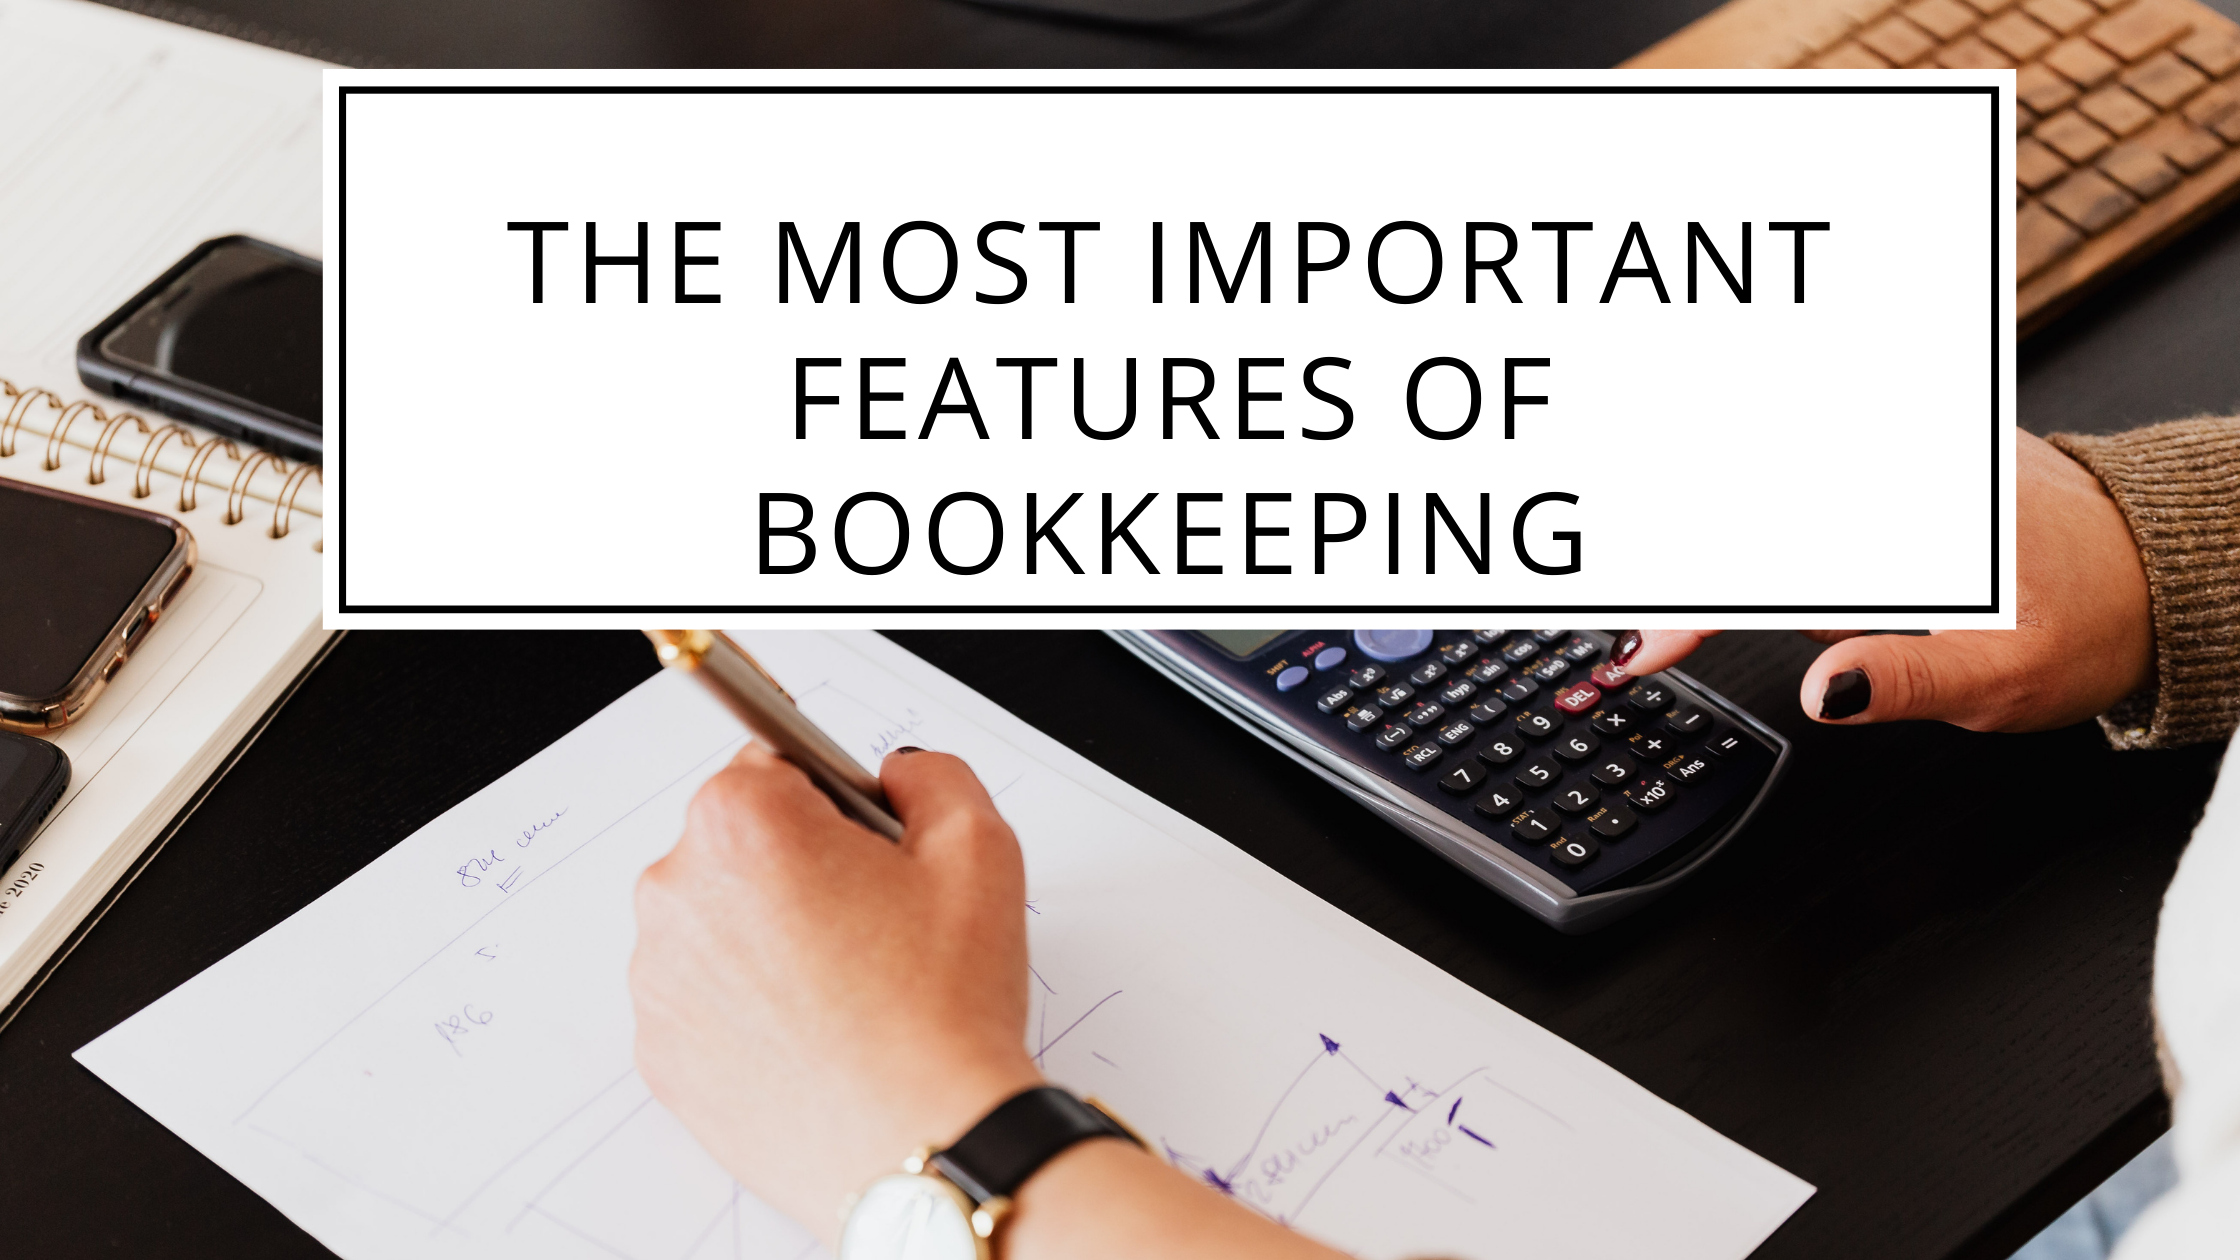 Features of Bookkeeping